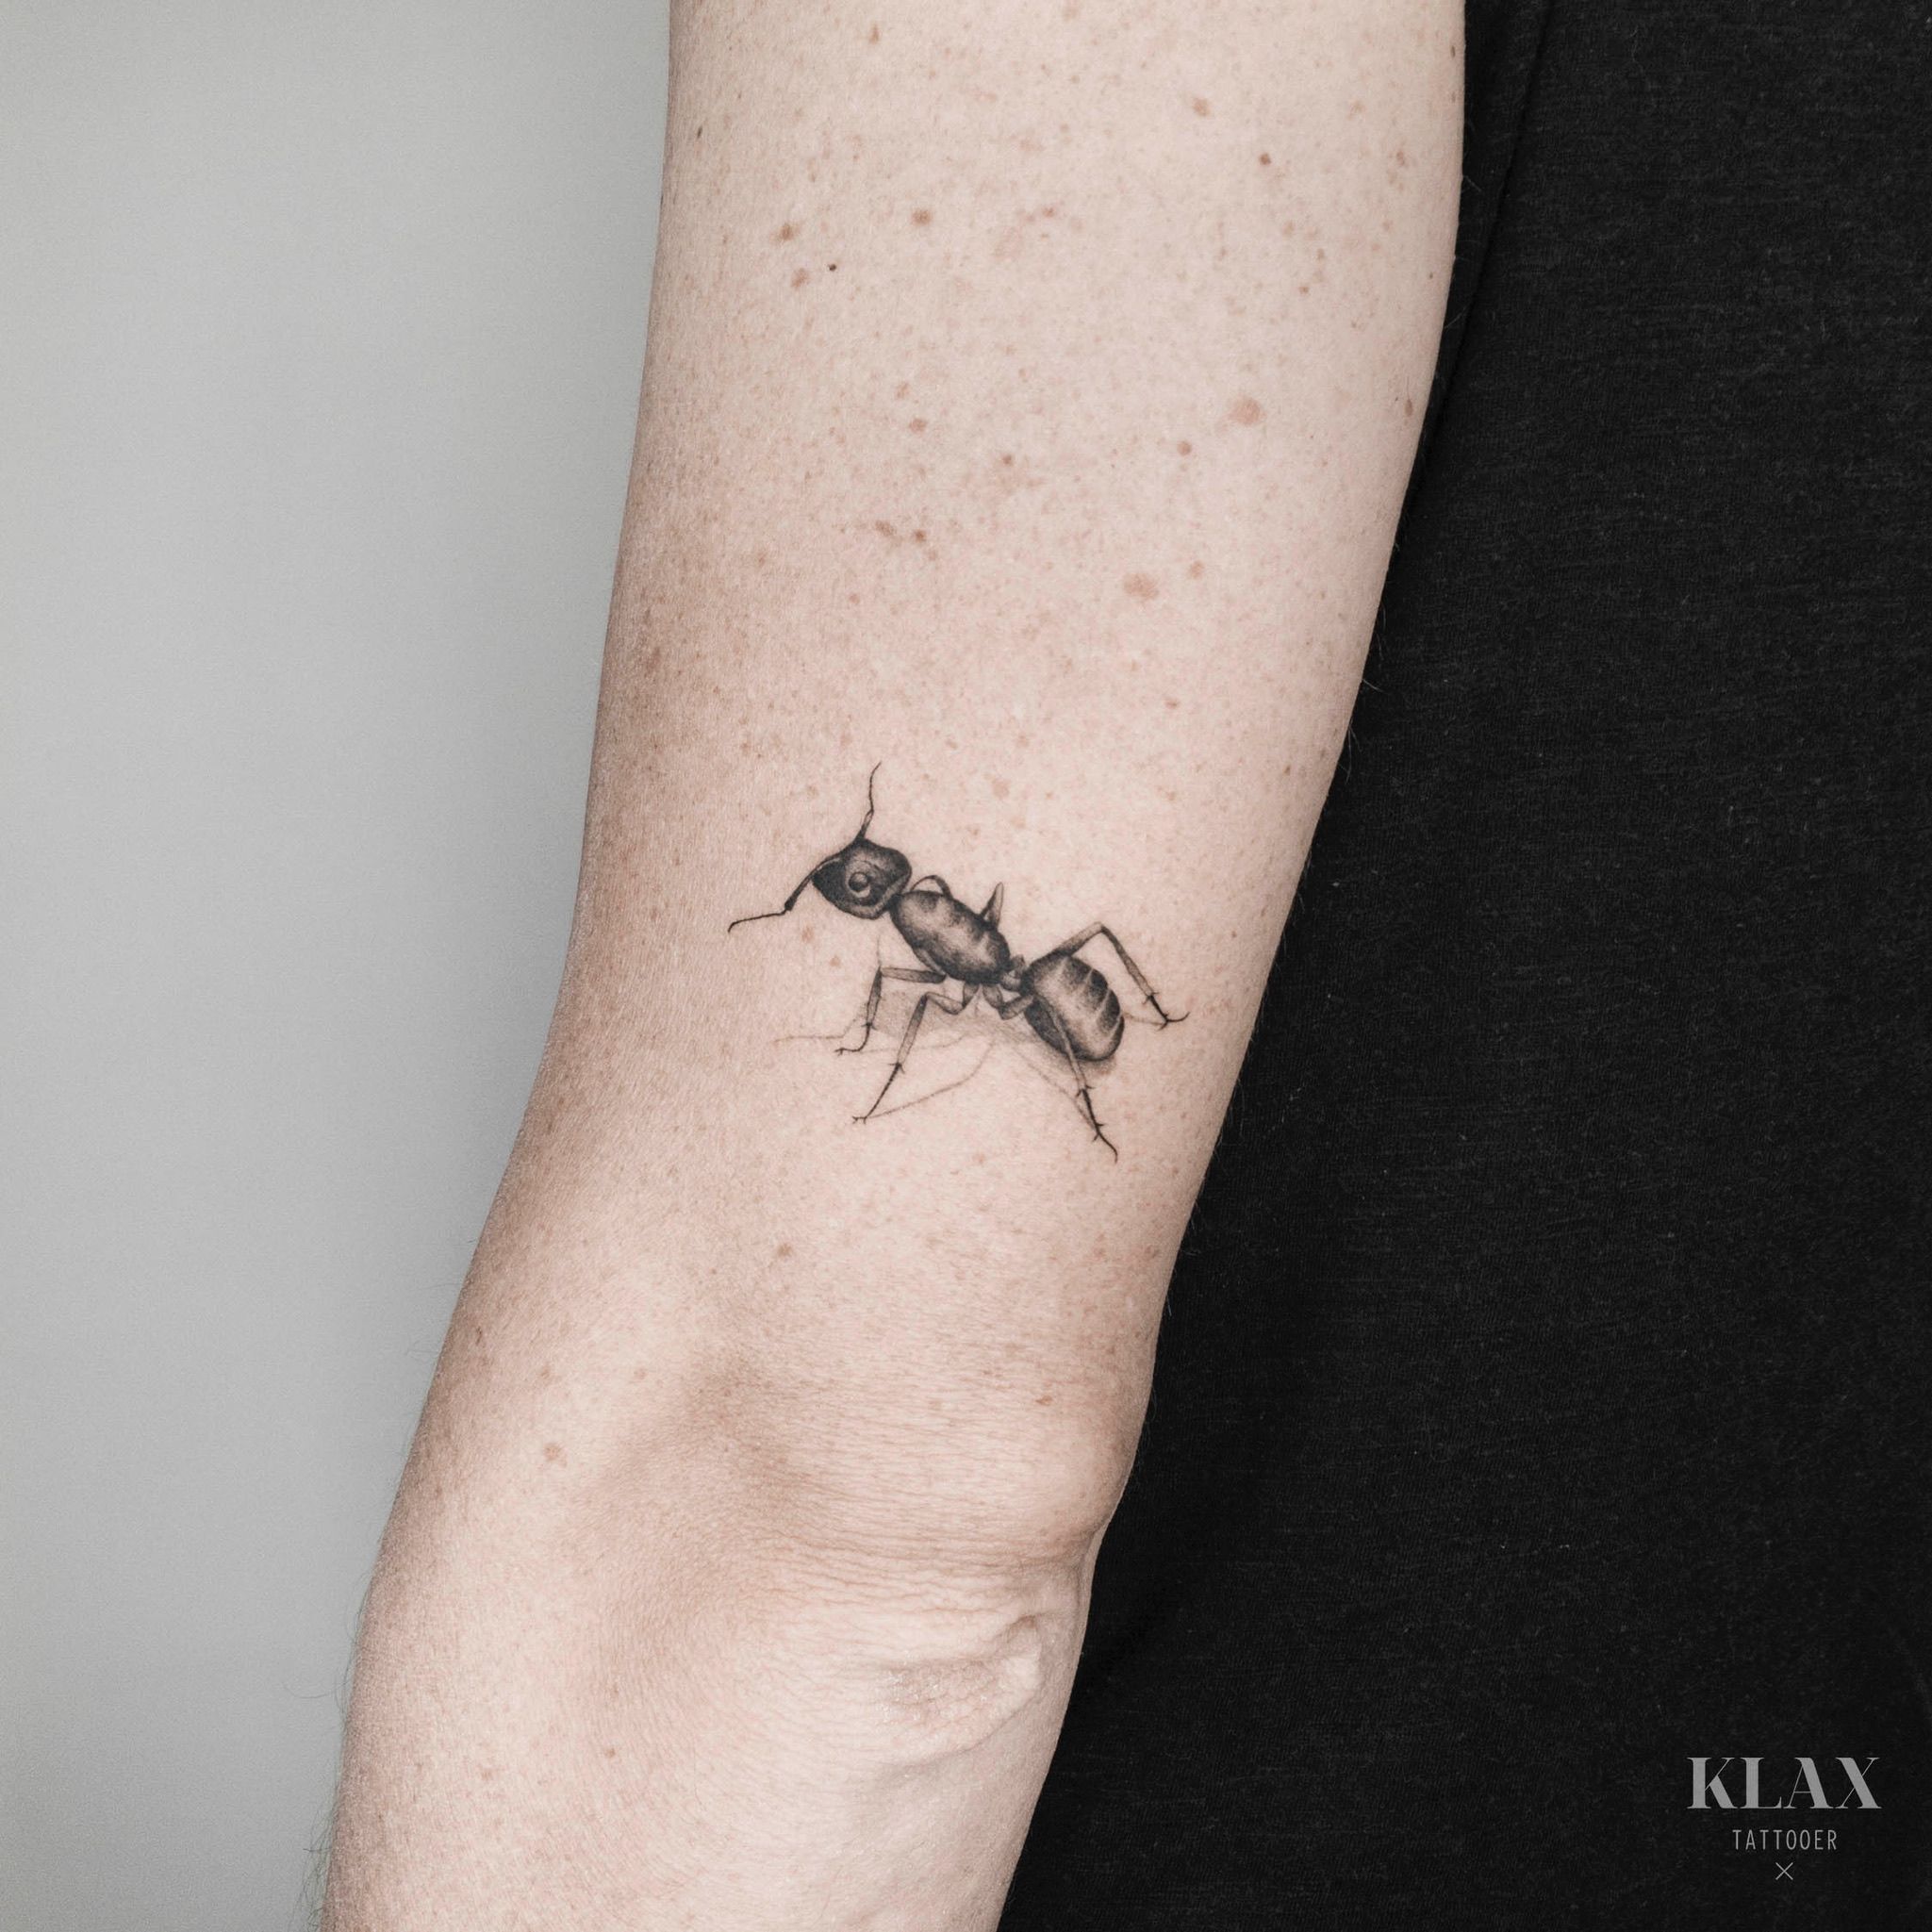 2332 Ant Tattoo Images Stock Photos  Vectors  Shutterstock